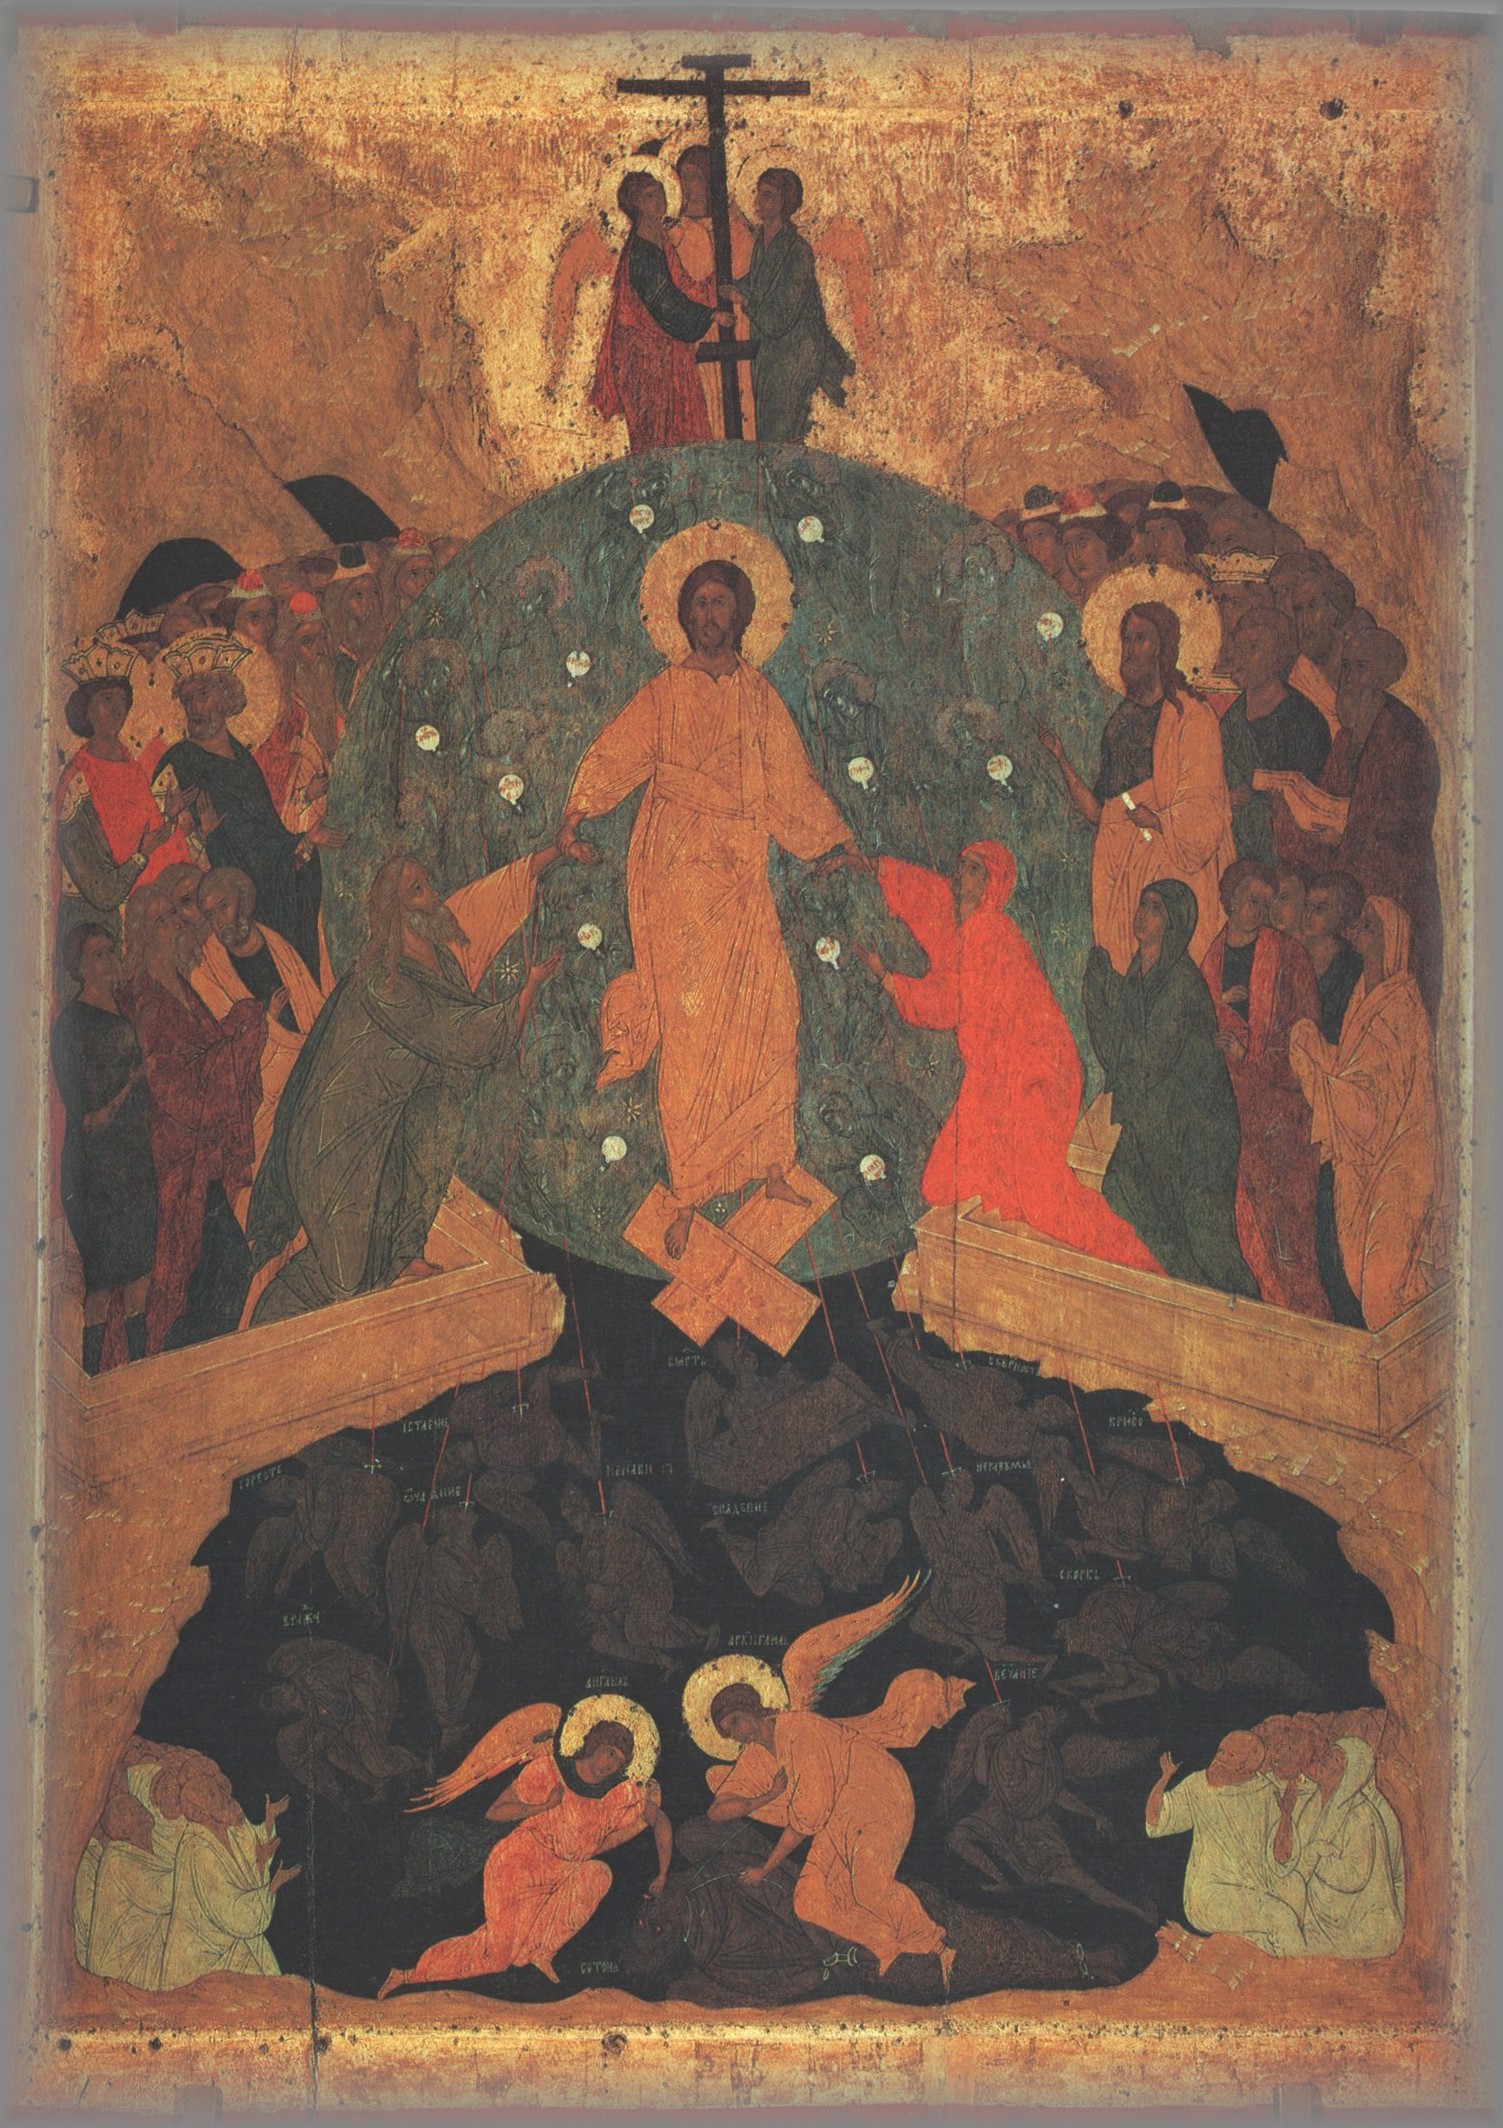 ICON; State Russian Museum, Sankt Petersburg, 1405-1504